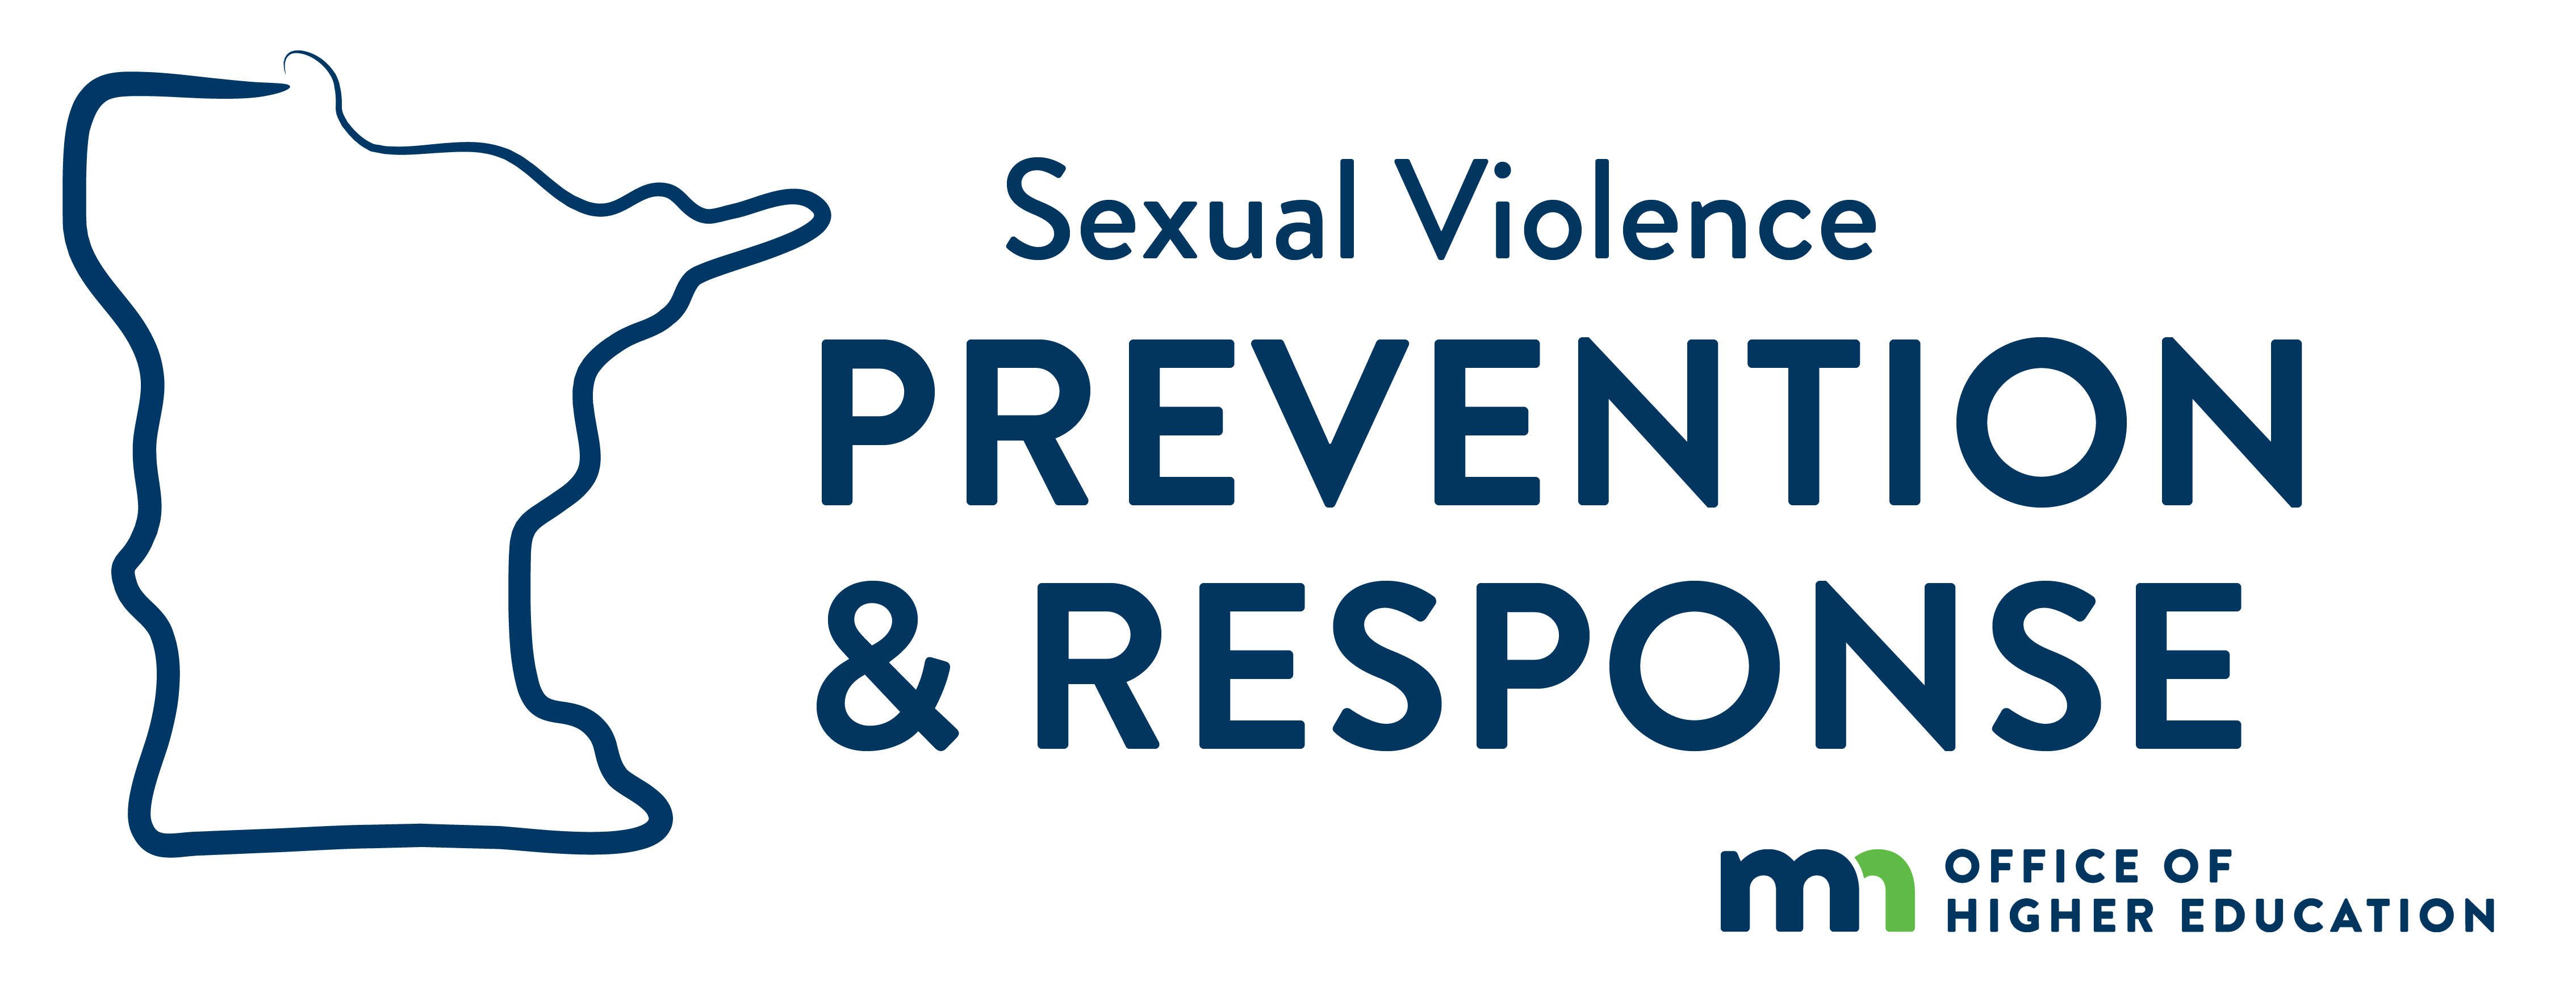 Sexual Violence Prevention and Response logo and OHE logo